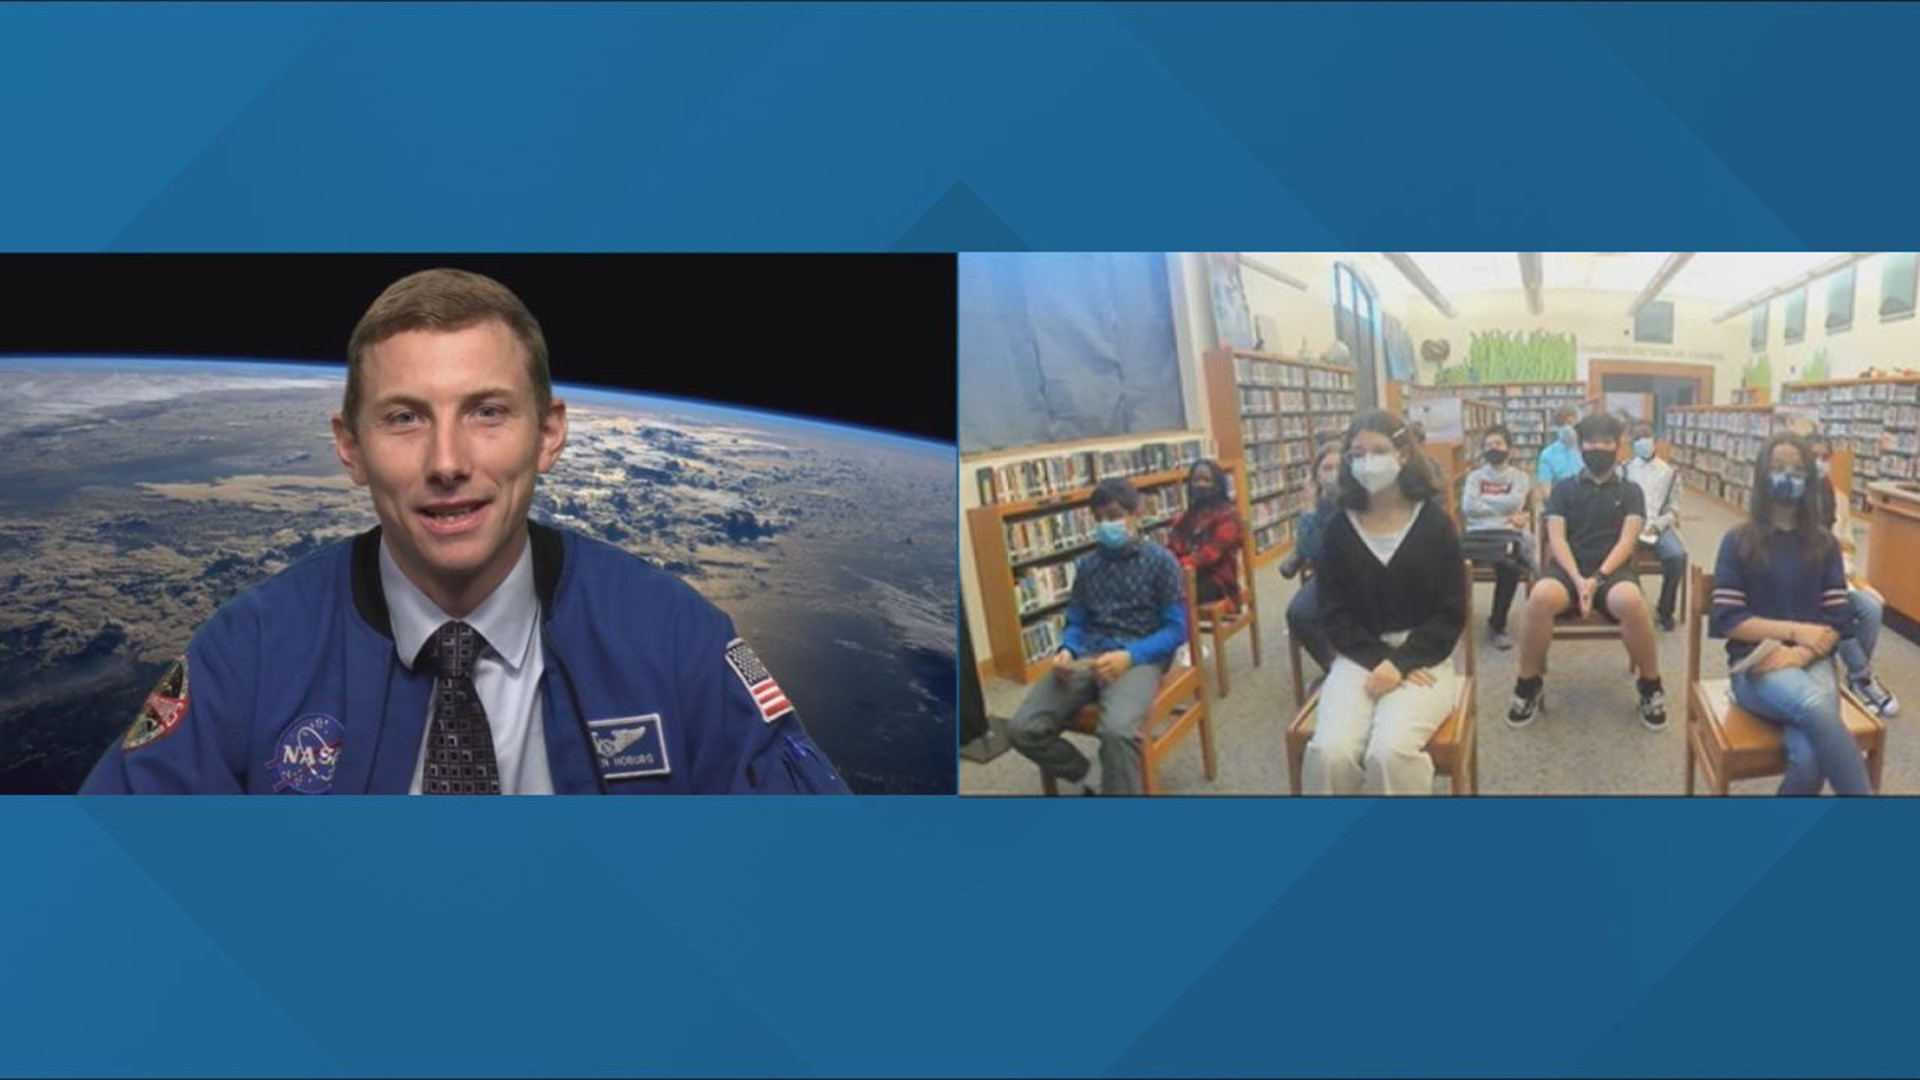 Astronaut Hoburg, a PA native, talked about how he became an astronaut, answered students' questions, and discussed NASA's next goal of putting people on the moon.